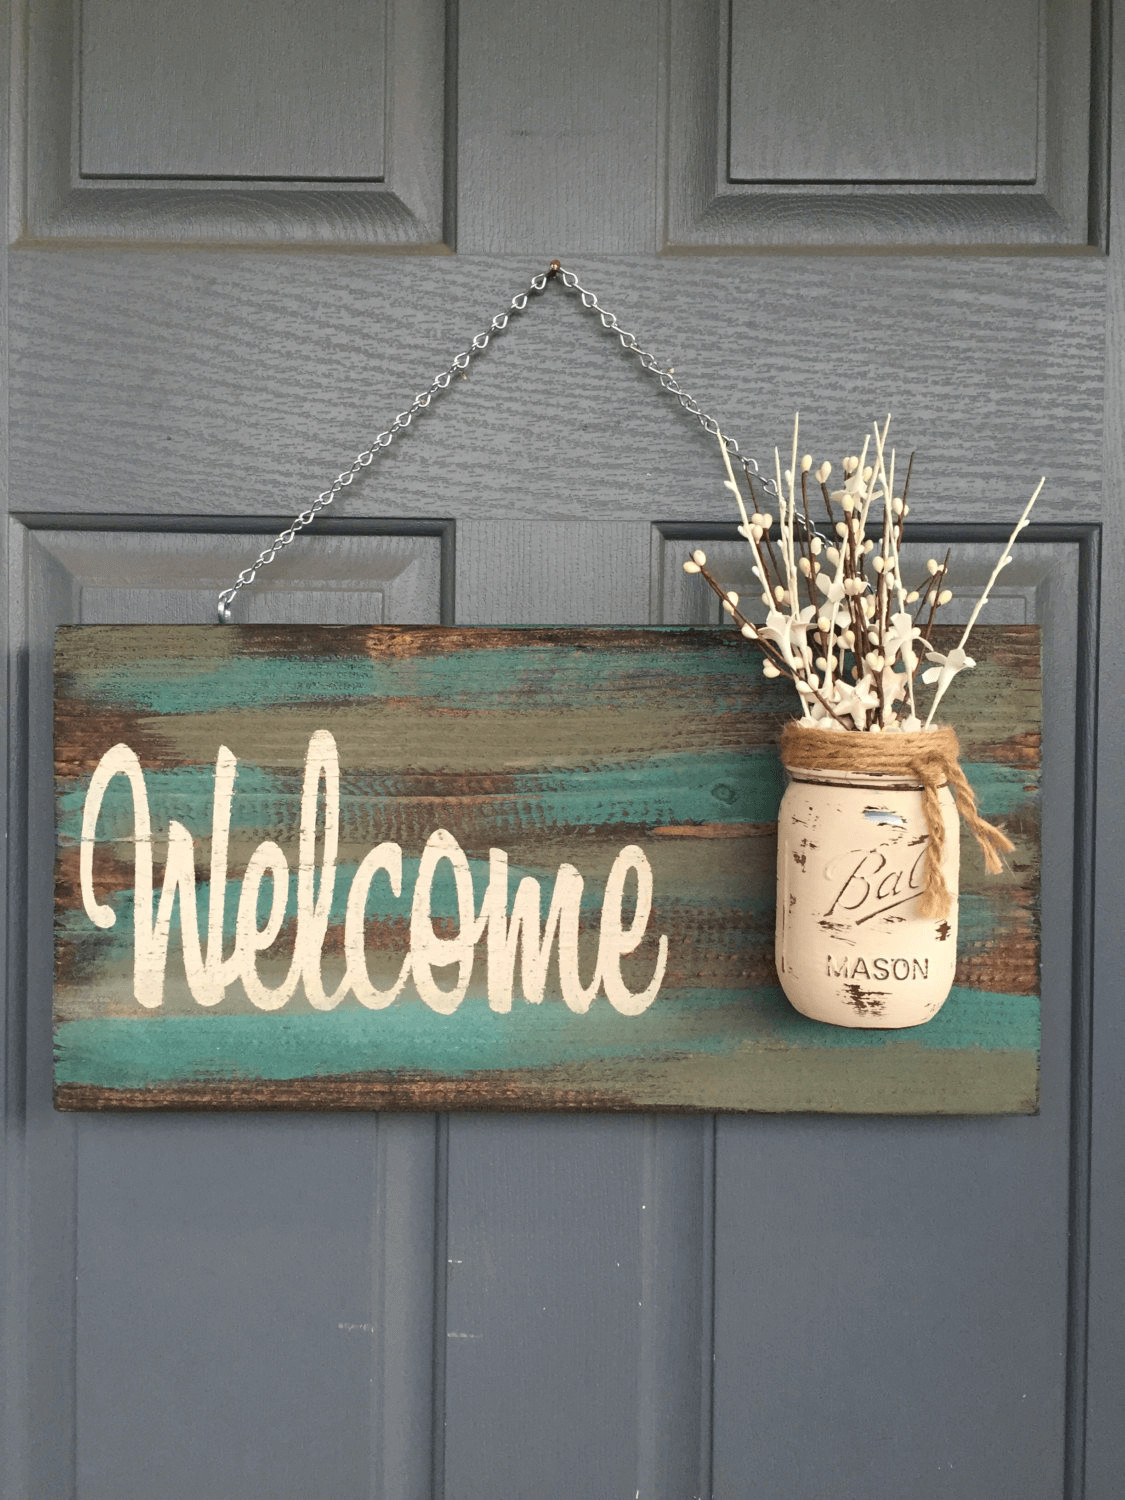 Rustic Wood Signs DIY
 Breath Taking Rustic Home Décor Signs from Wood Charm